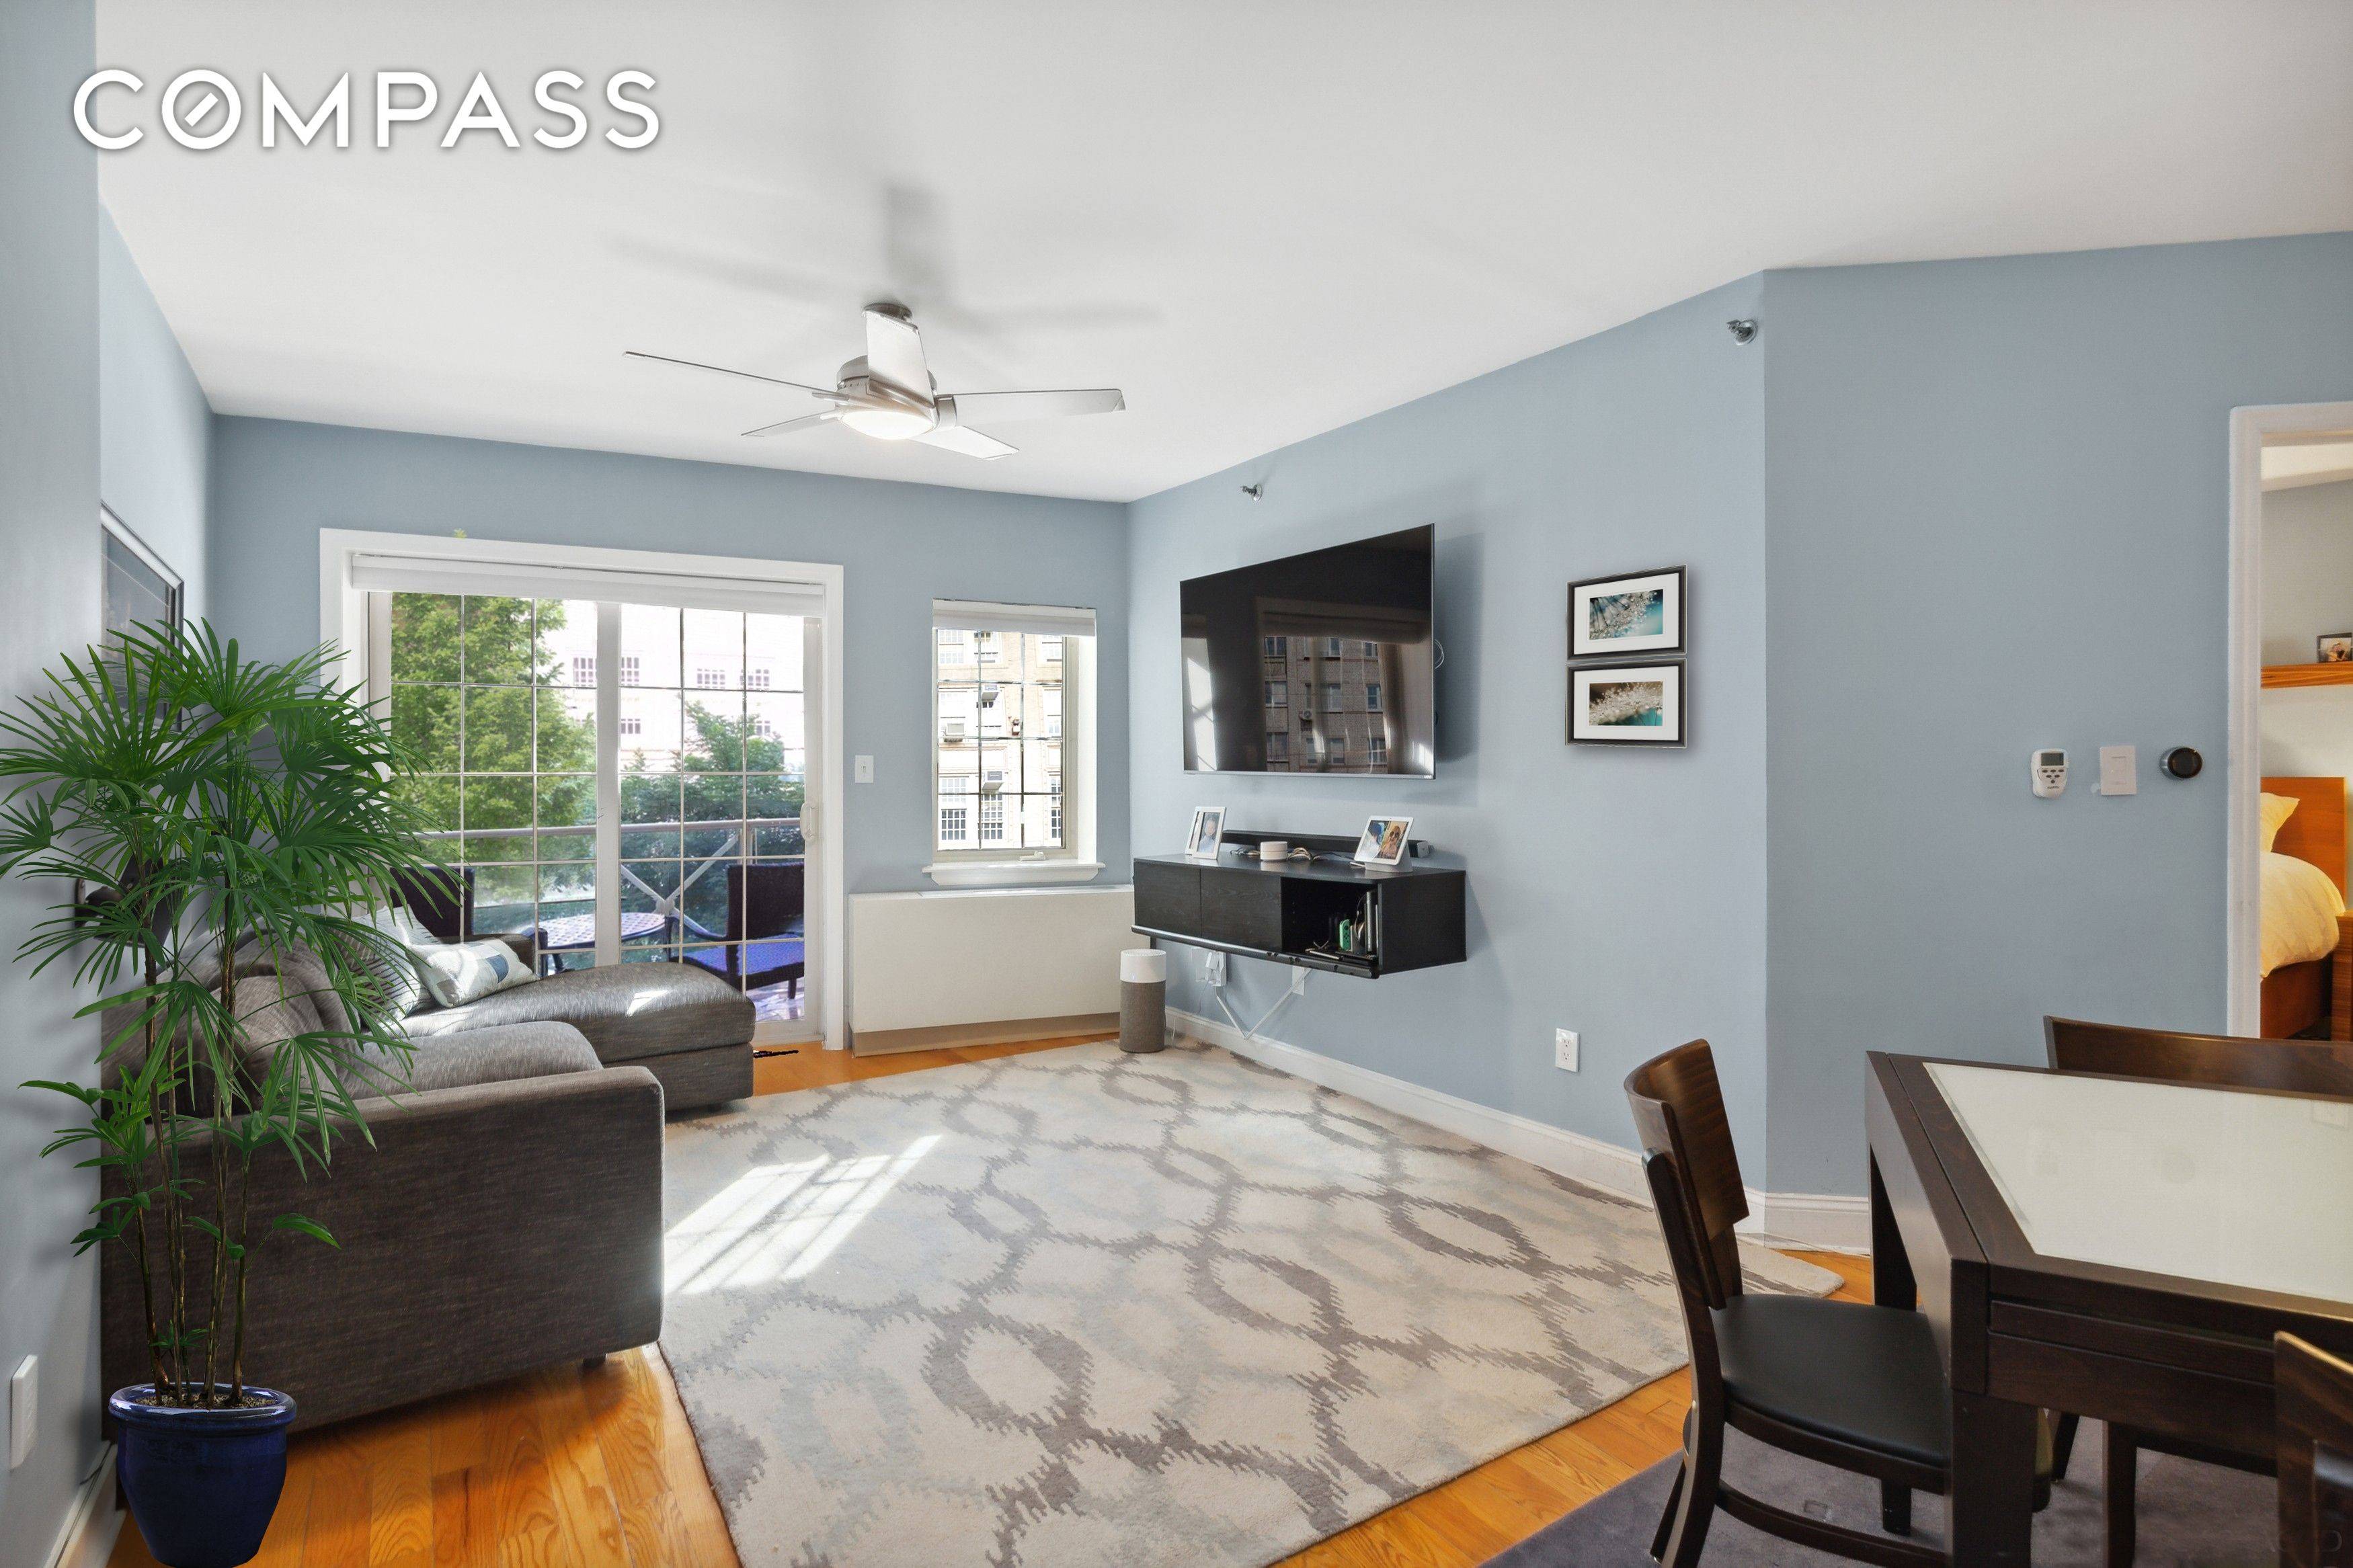 3 BEDROOM CONDO IN PRIME HUDSON HEIGHTS You will love living on tree lined Cabrini Boulevard, bathed in morning light in this rarely available 3 bedroom, 2 full bath condo.